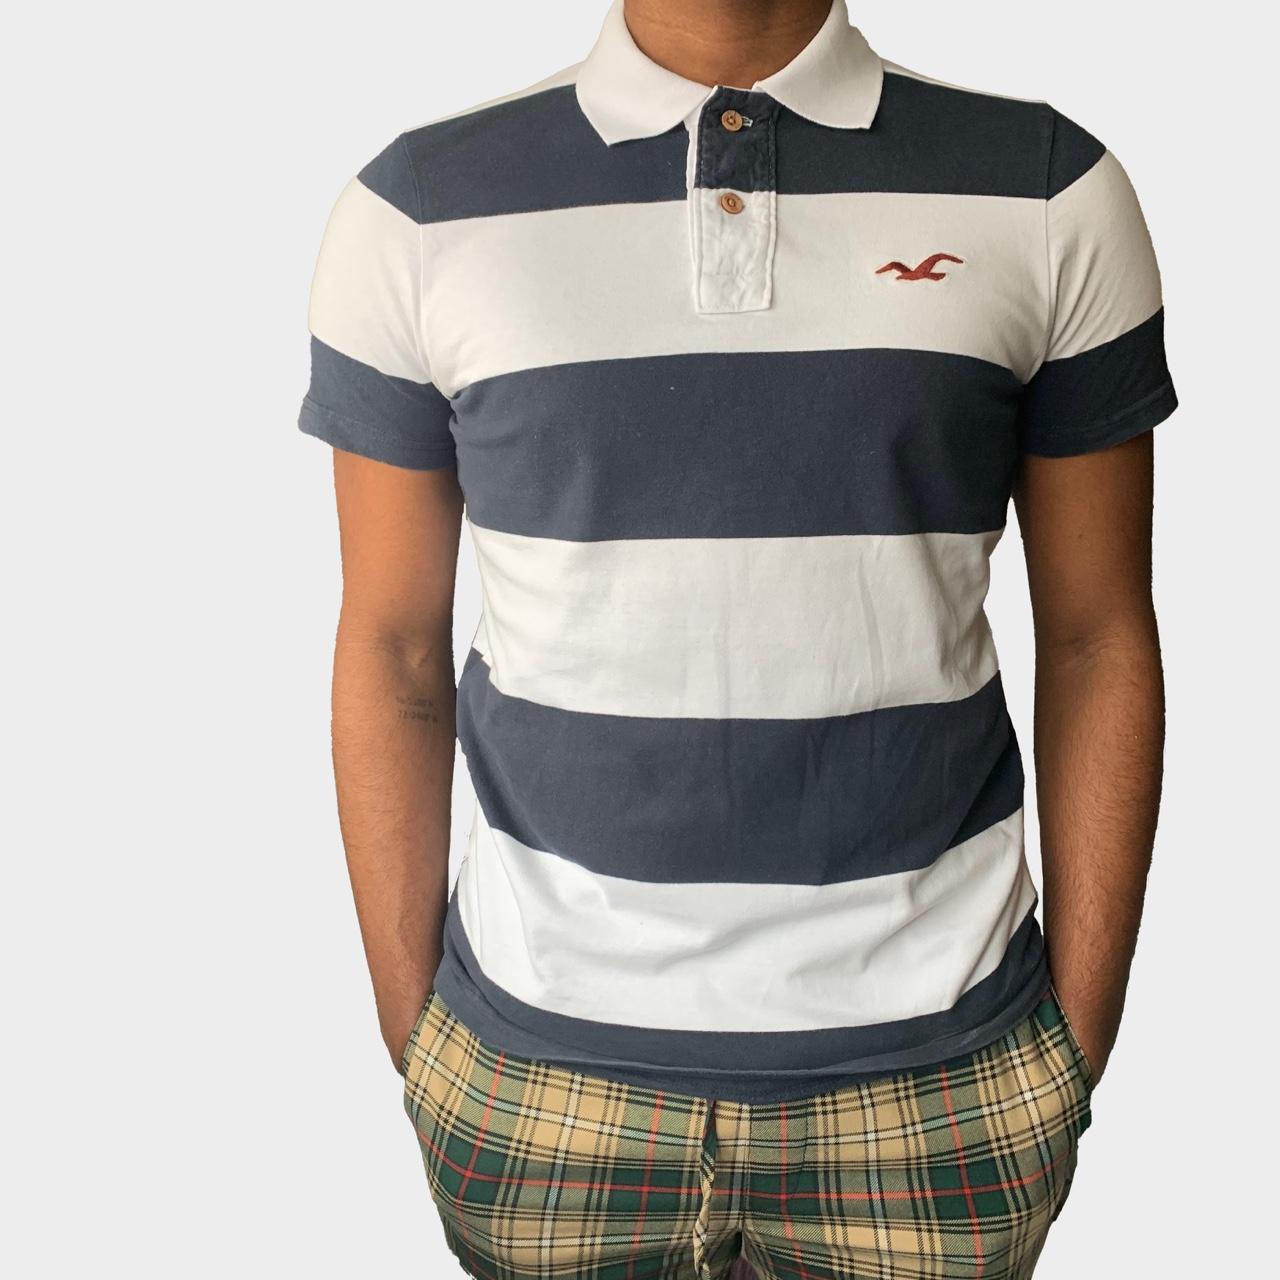 Hollister Block Stripe Polo Shirt This Navy Blue and - Depop